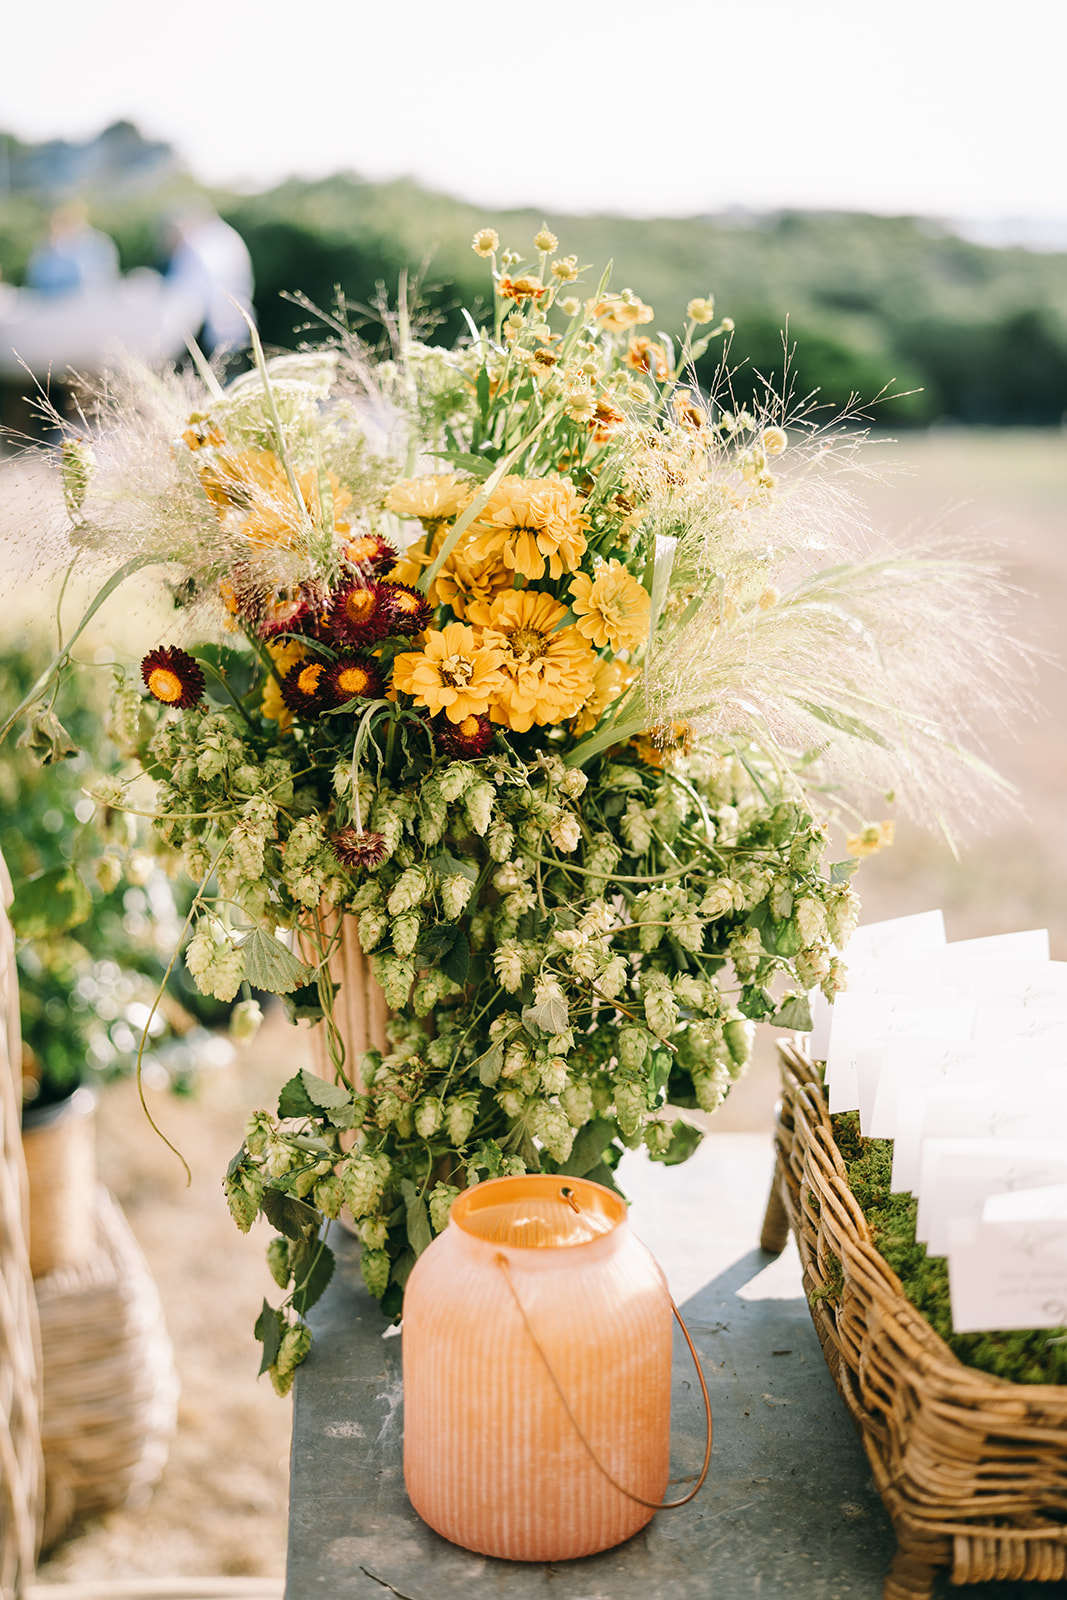 Greenery and yellow flowers in wicker basket behind an orange candle holder in 